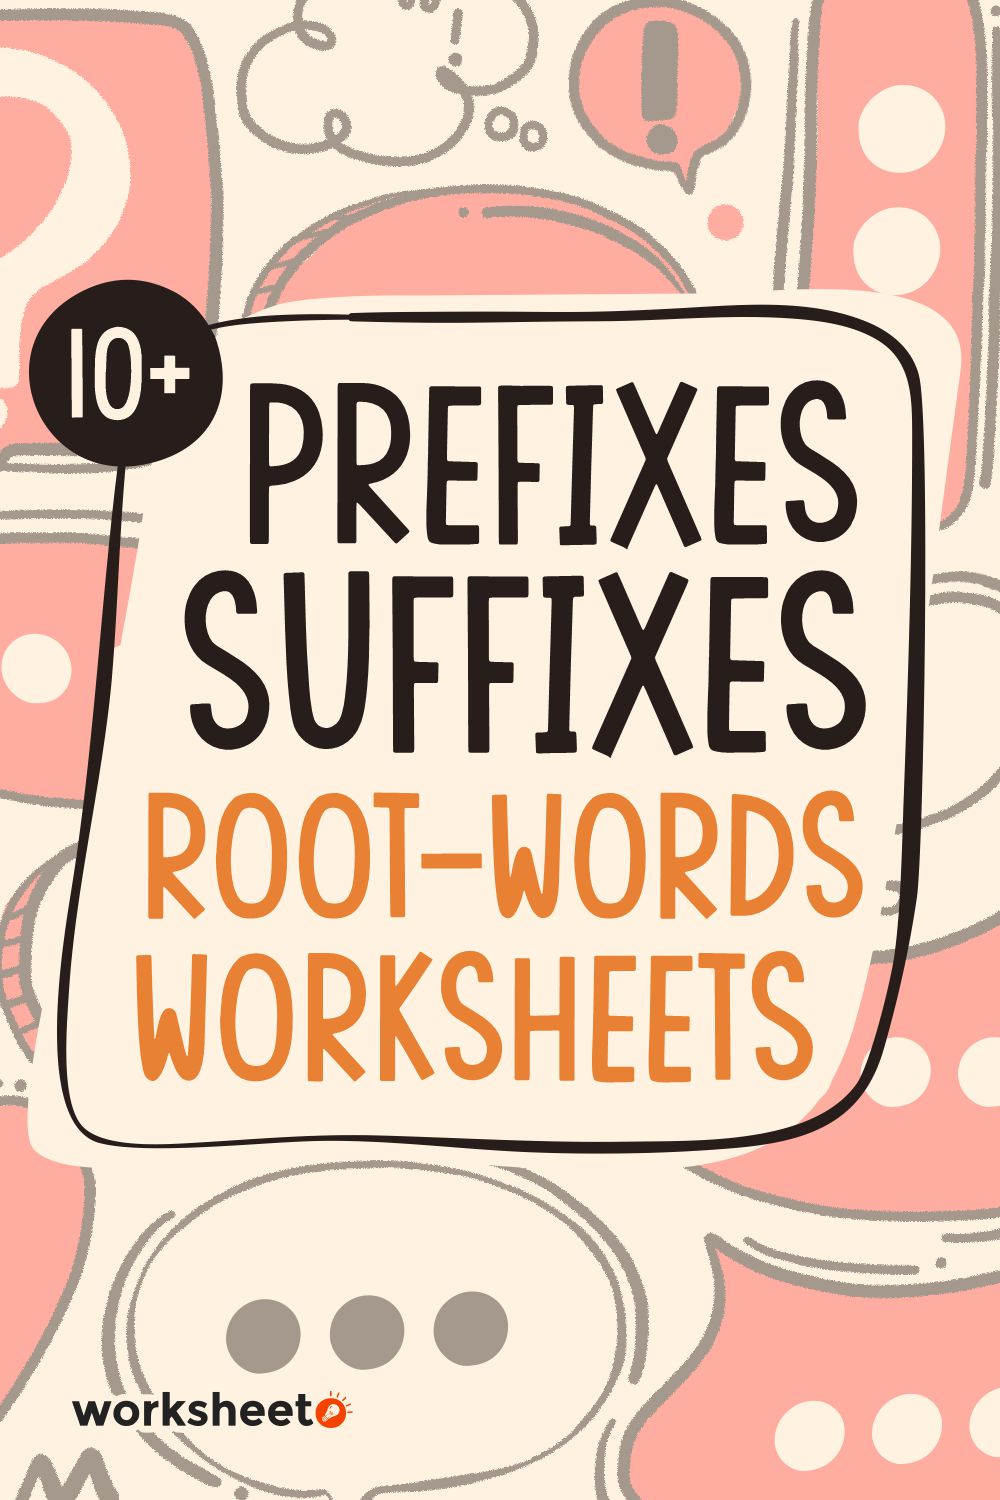 14 Images of Prefixes Suffixes ROOT- WORDS Worksheets